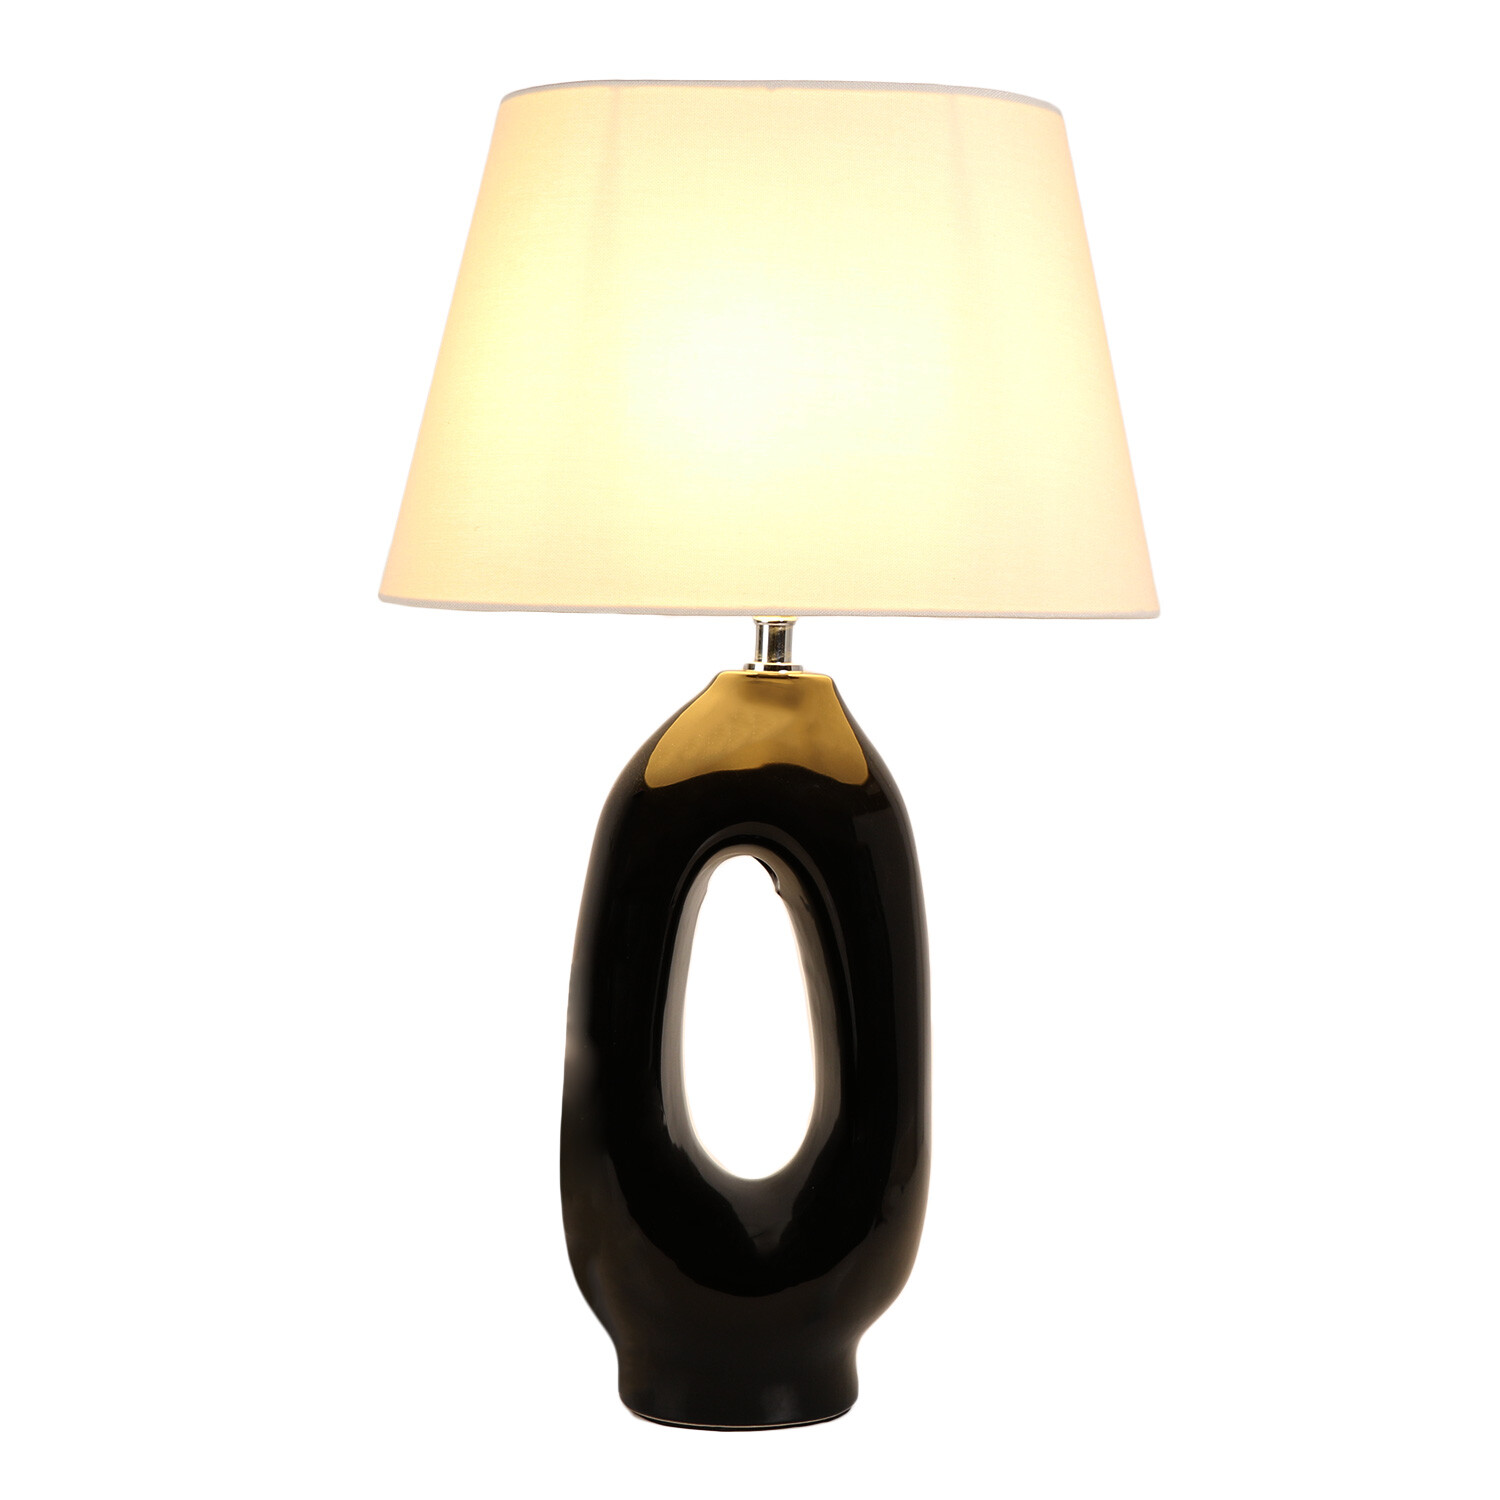 Single Harriet Oval Table Lamp in Assorted styles Image 6